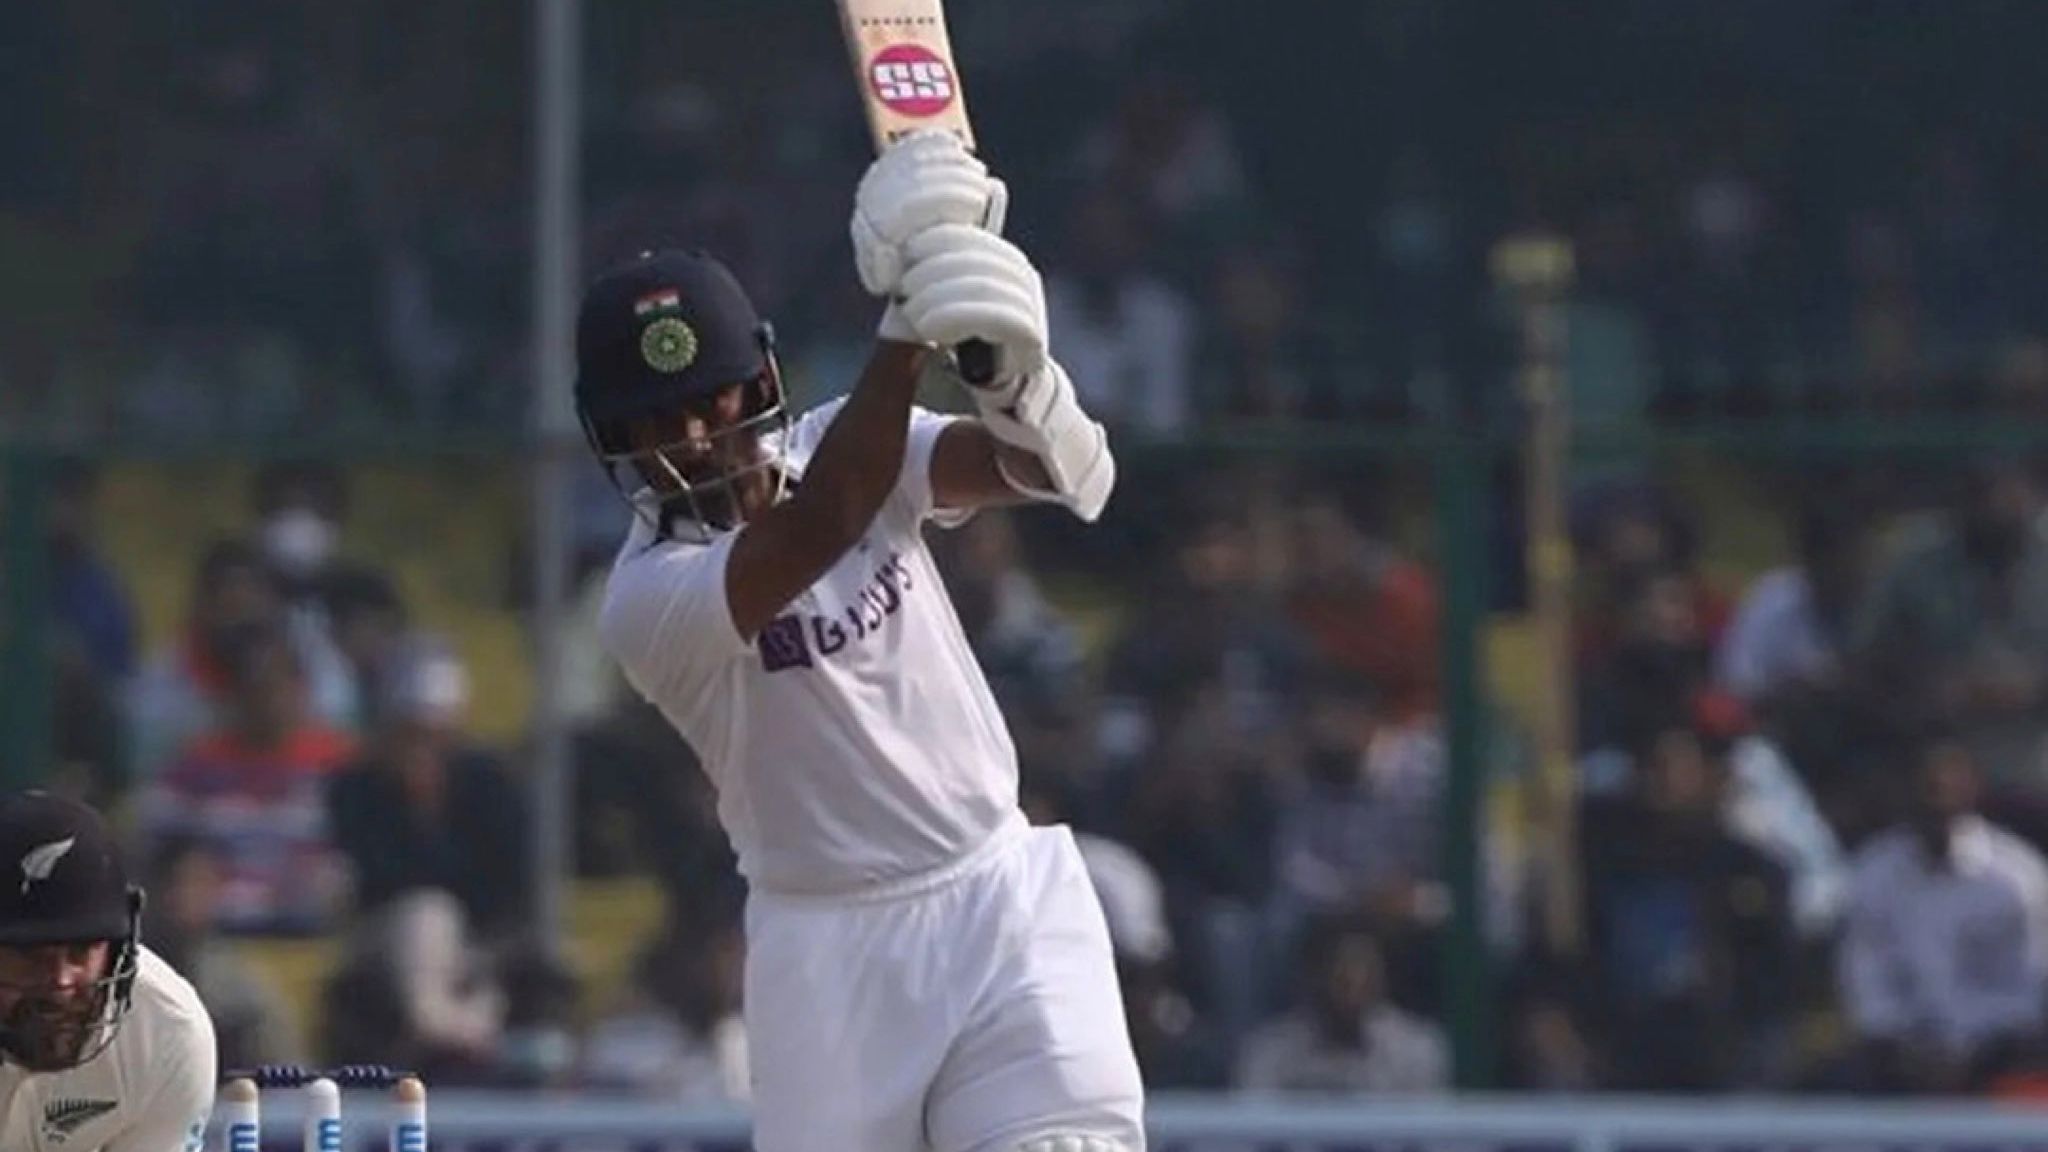 IND vs NZ | 1st Test: Wriddhiman Saha scores first Test fifty since 2017; India set 284 as target